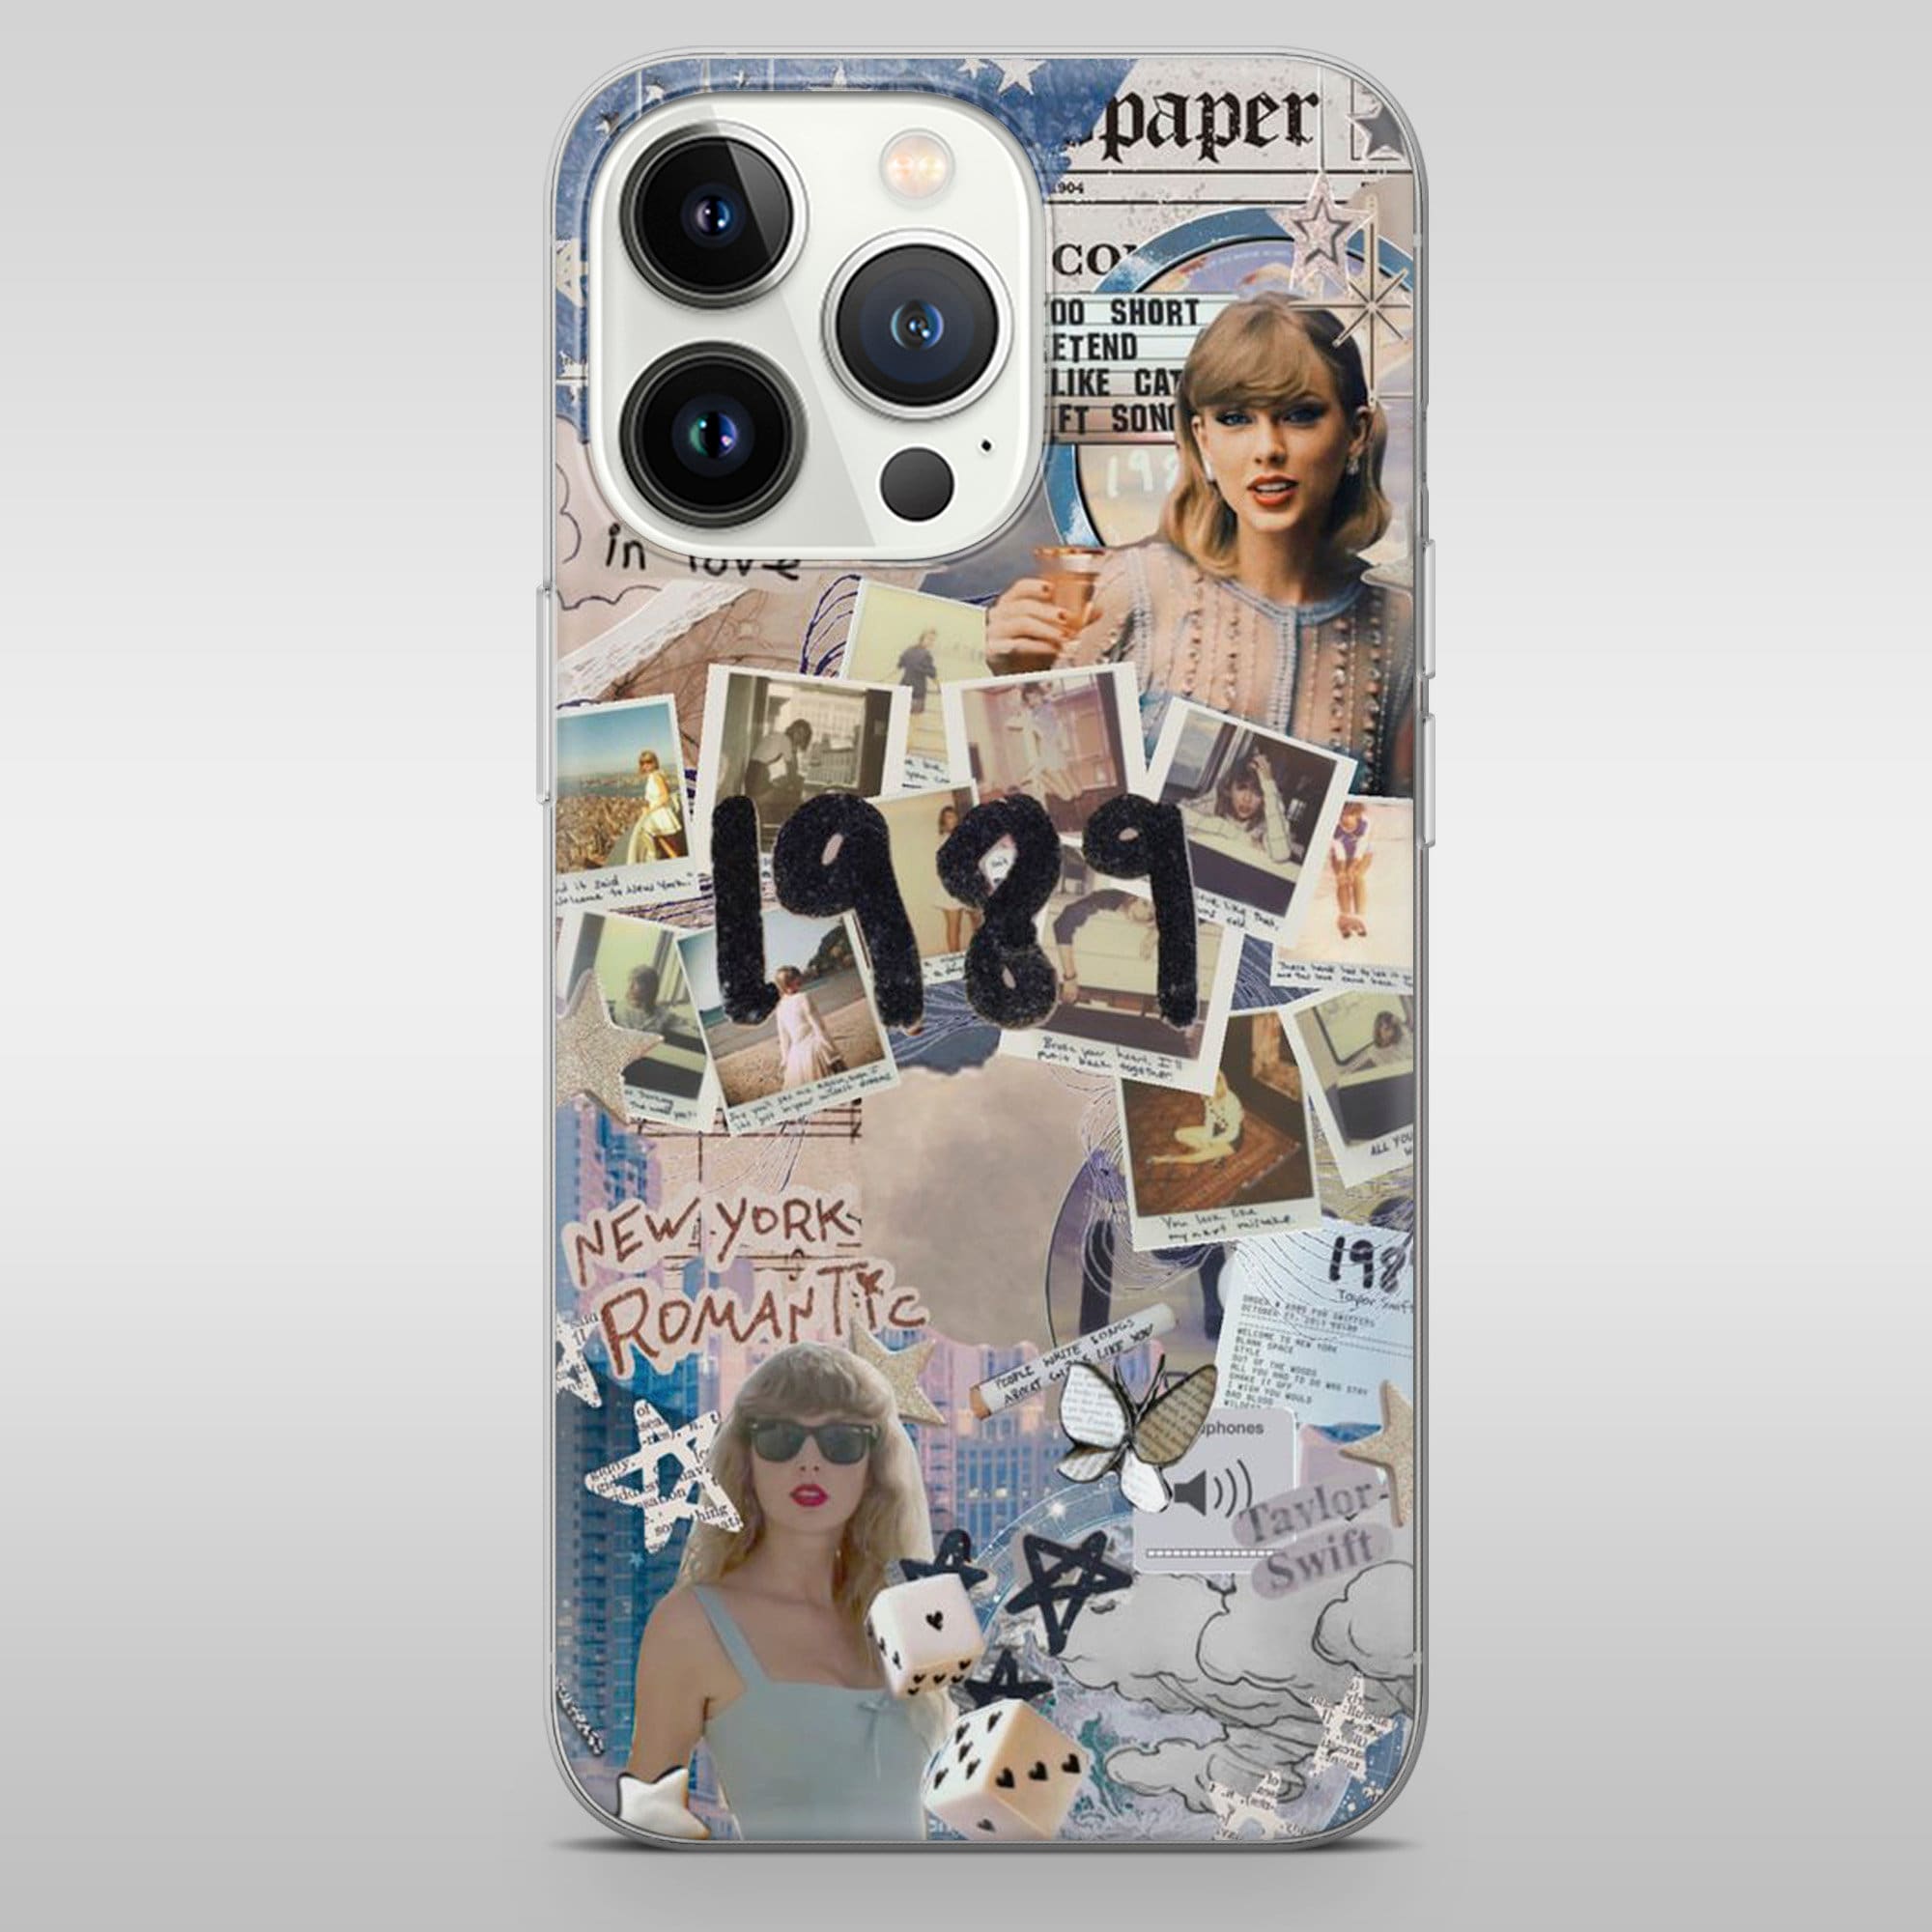 Discover Taylor Lyrics Phone Case Midnight Eras Tour Cover for iPhone